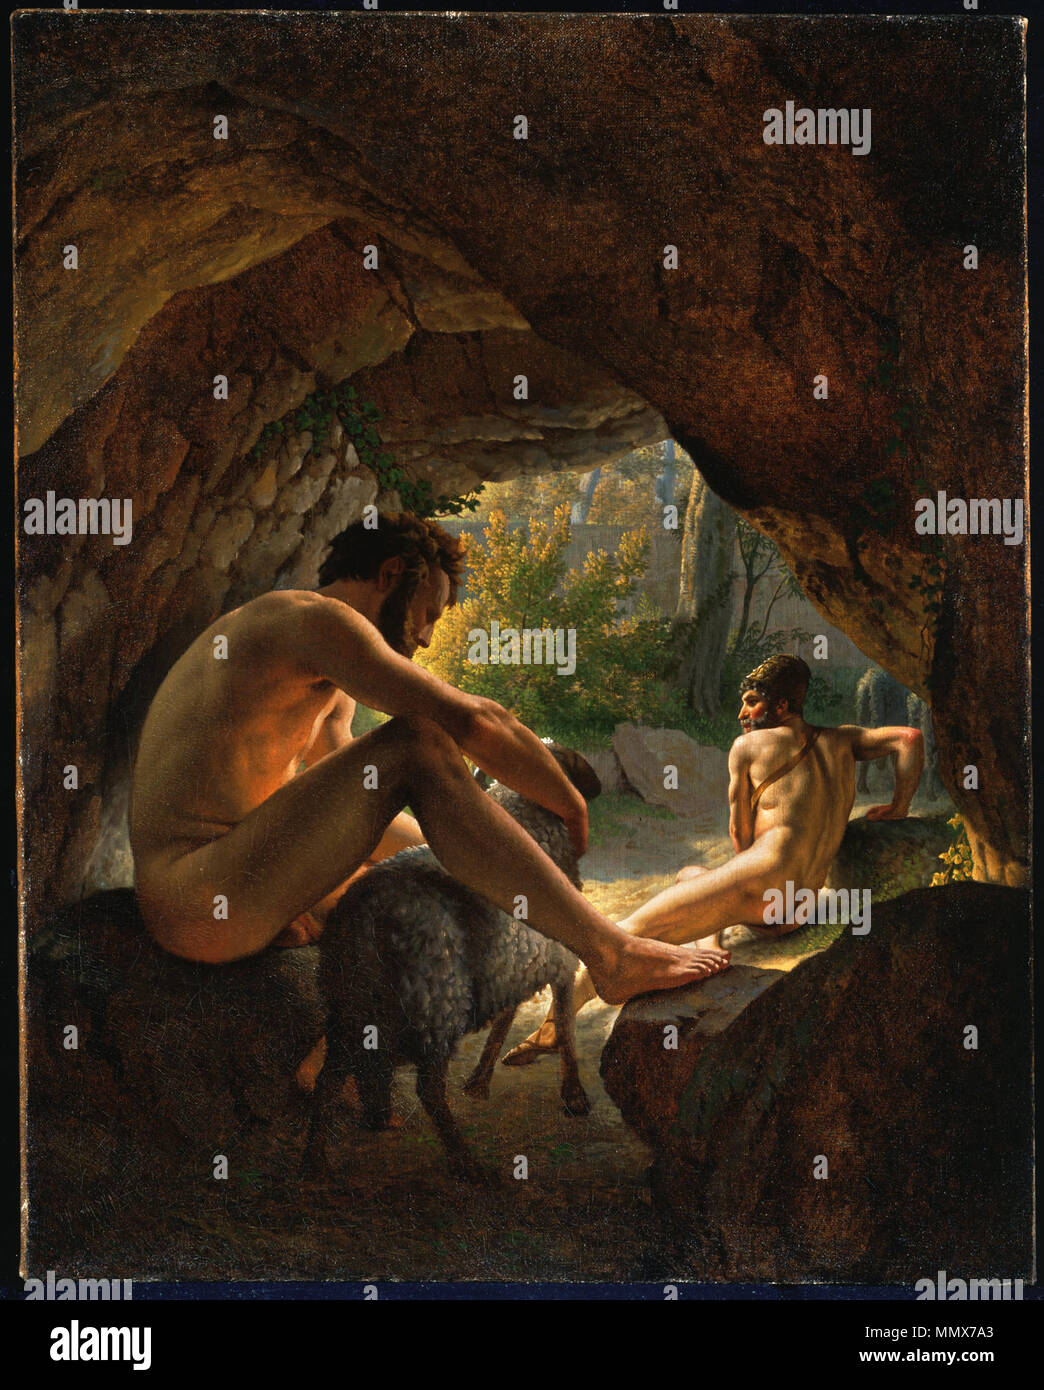 .  English: Catalogue Entry: Eckersberg spent 1811 to 1812 in the studio of David, practicing life drawing and history painting. One of a series of subjects from the Odyssey, this is perhaps the most compelling. The giant Polyphemus in his cave looms over a sheep, searching for Ulysses and his companions, who blinded the one-eyed monster. The men have escaped beneath the bellies of the flock; Ulysses, at the end, prepares to join his companions. The Mediterranean light is dazzling. We viewers remain imprisoned in the tenebrous foreground as Ulysses slips away. Eckersberg’s study of the eloque Stock Photo